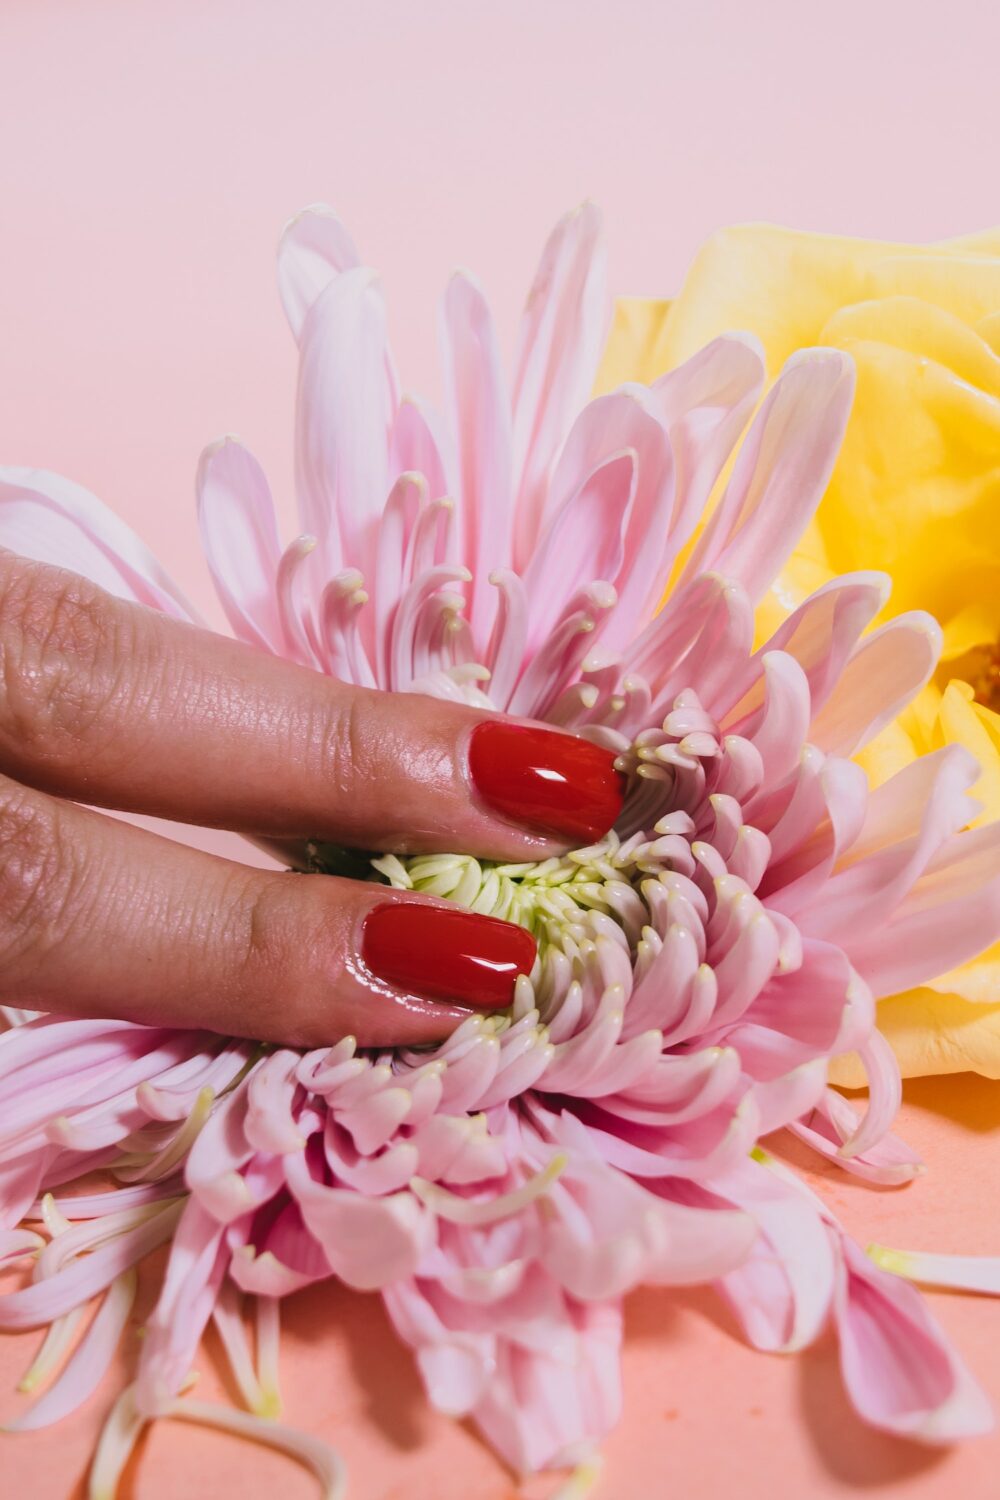 Two female fingers pressing on a flower suggestively